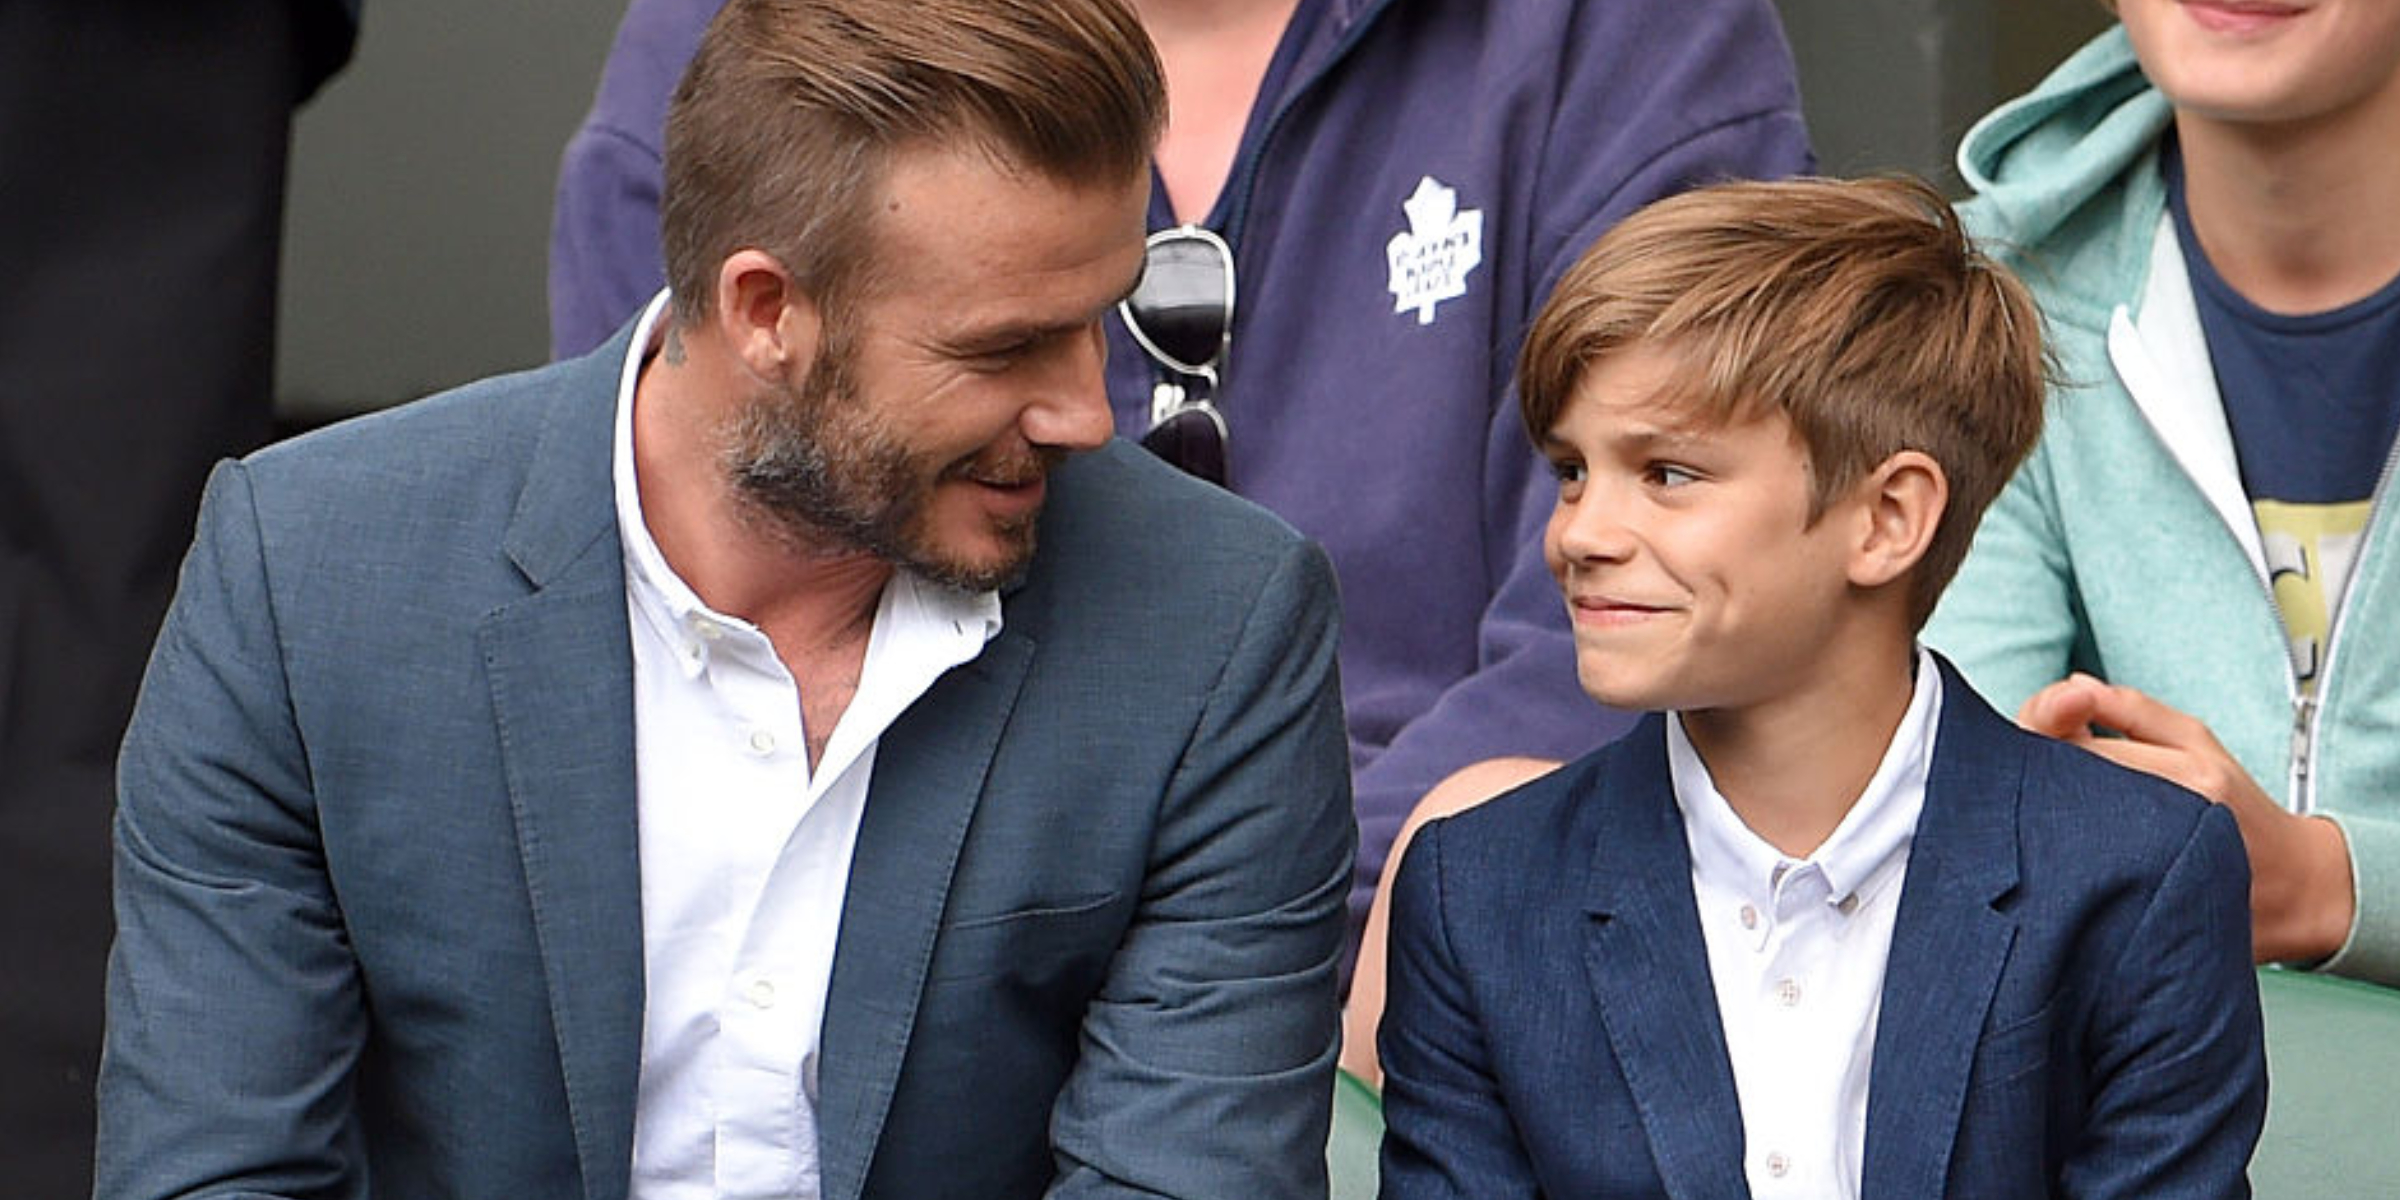 David and Romeo Beckham | Source: Getty Images